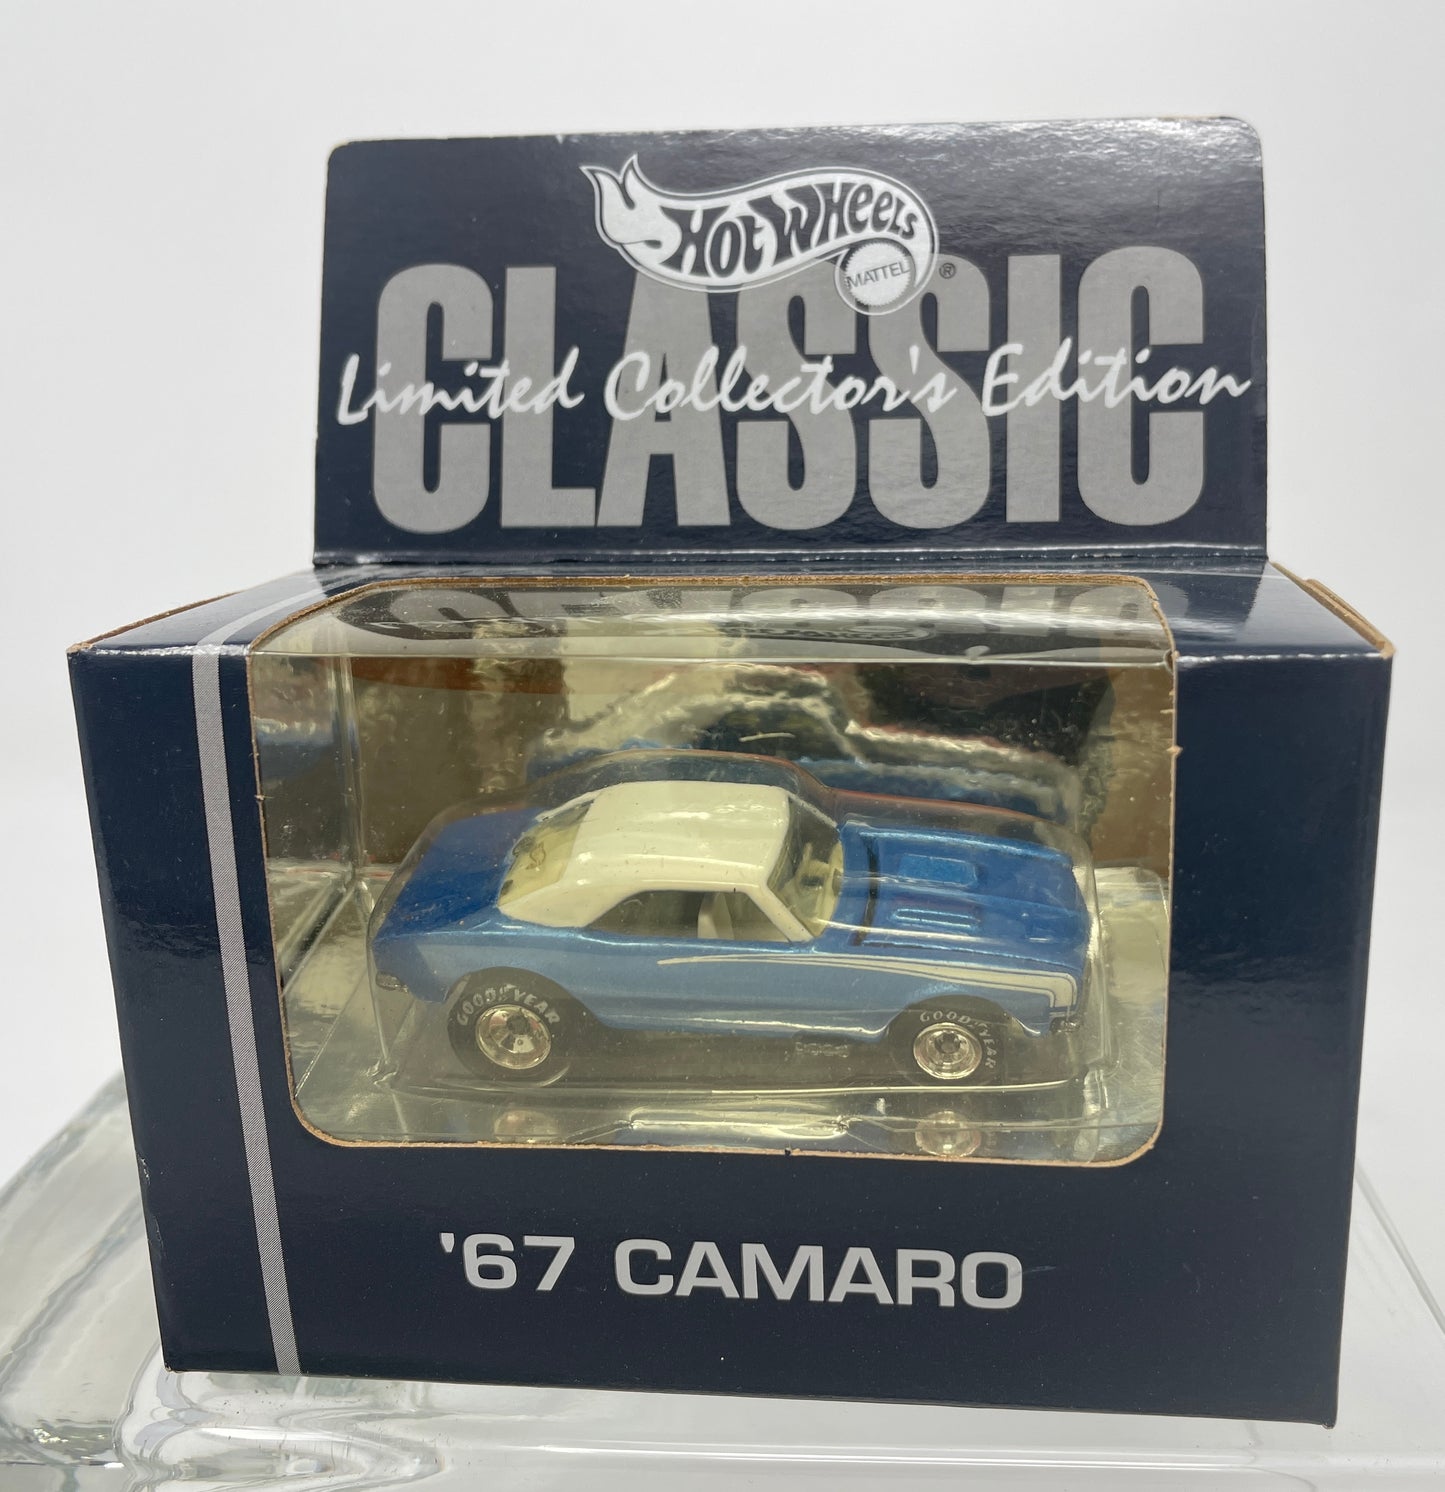 HOT WHEELS '67 CAMARO - CLASSIC LIMITED COLLECTOR'S EDITION - #15929 - MATTEL 1993